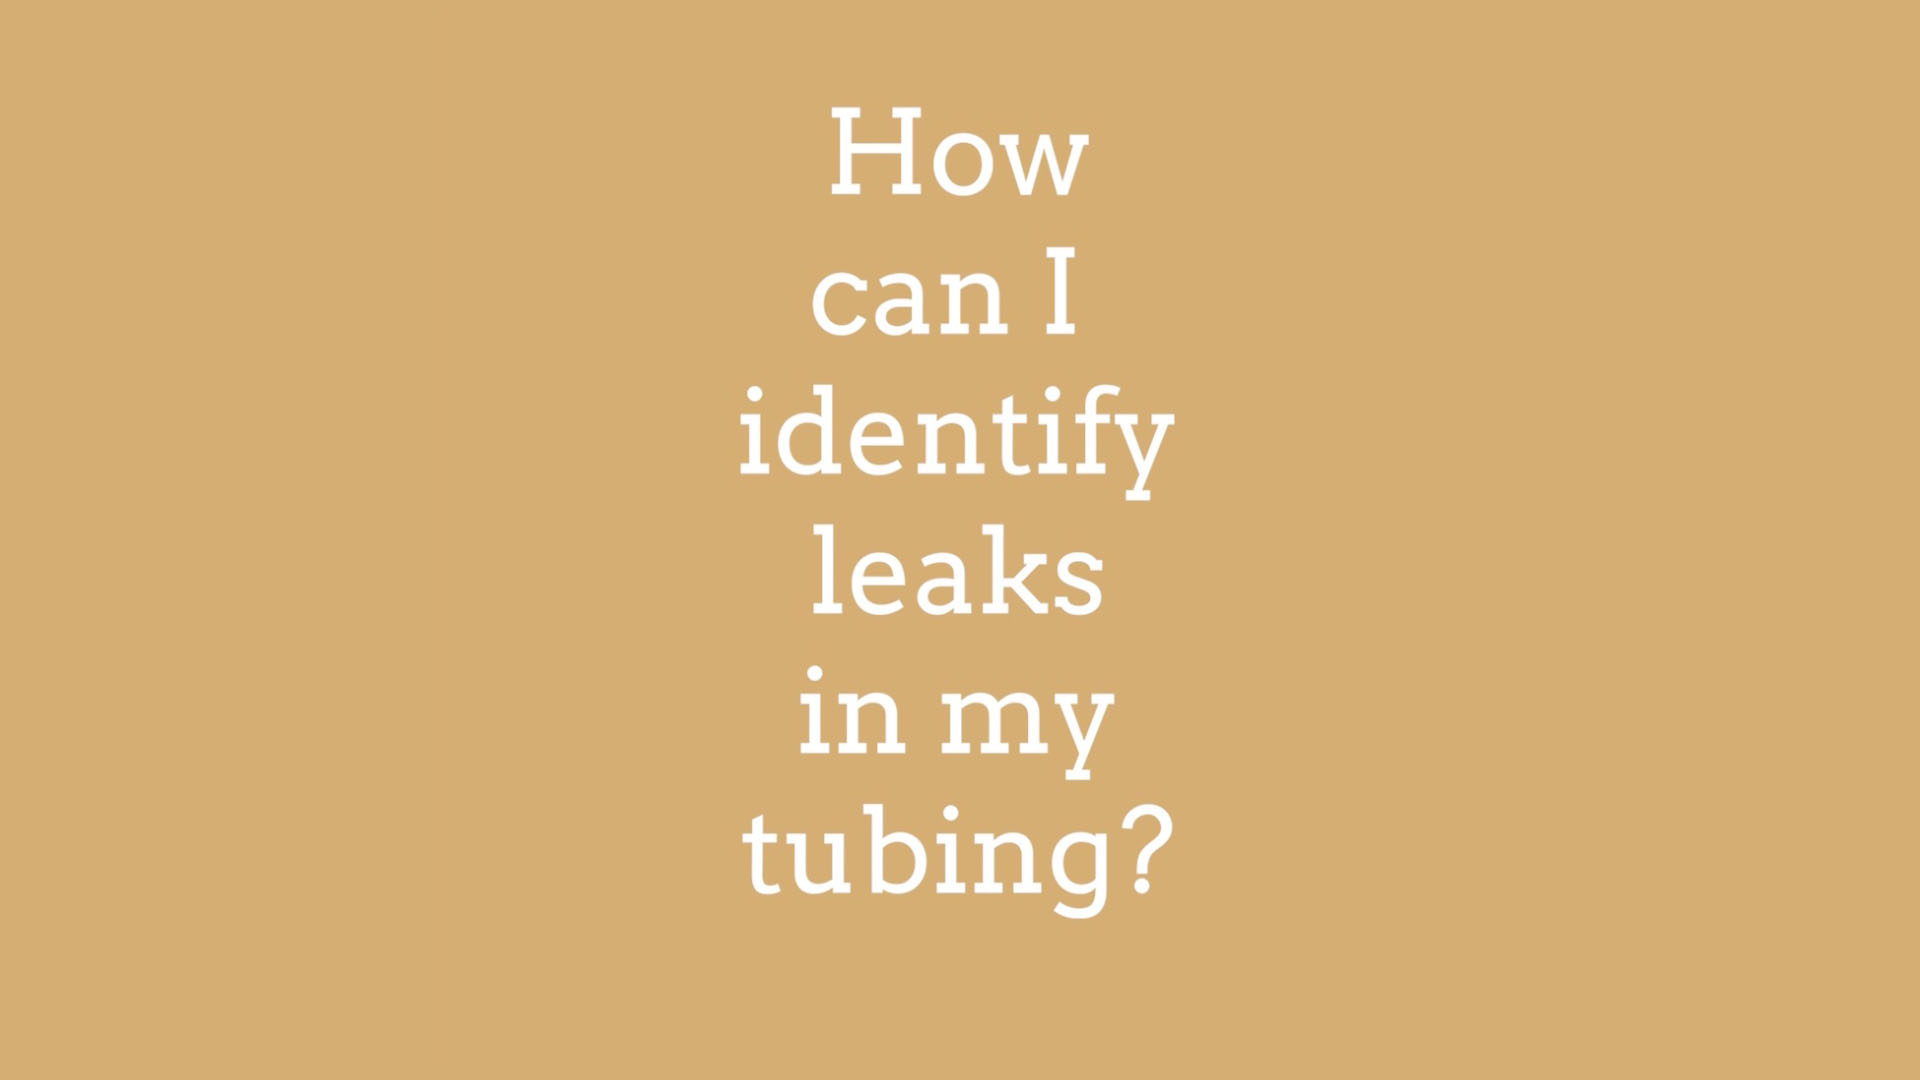 How Can I Identify Leaks in my Tubing?